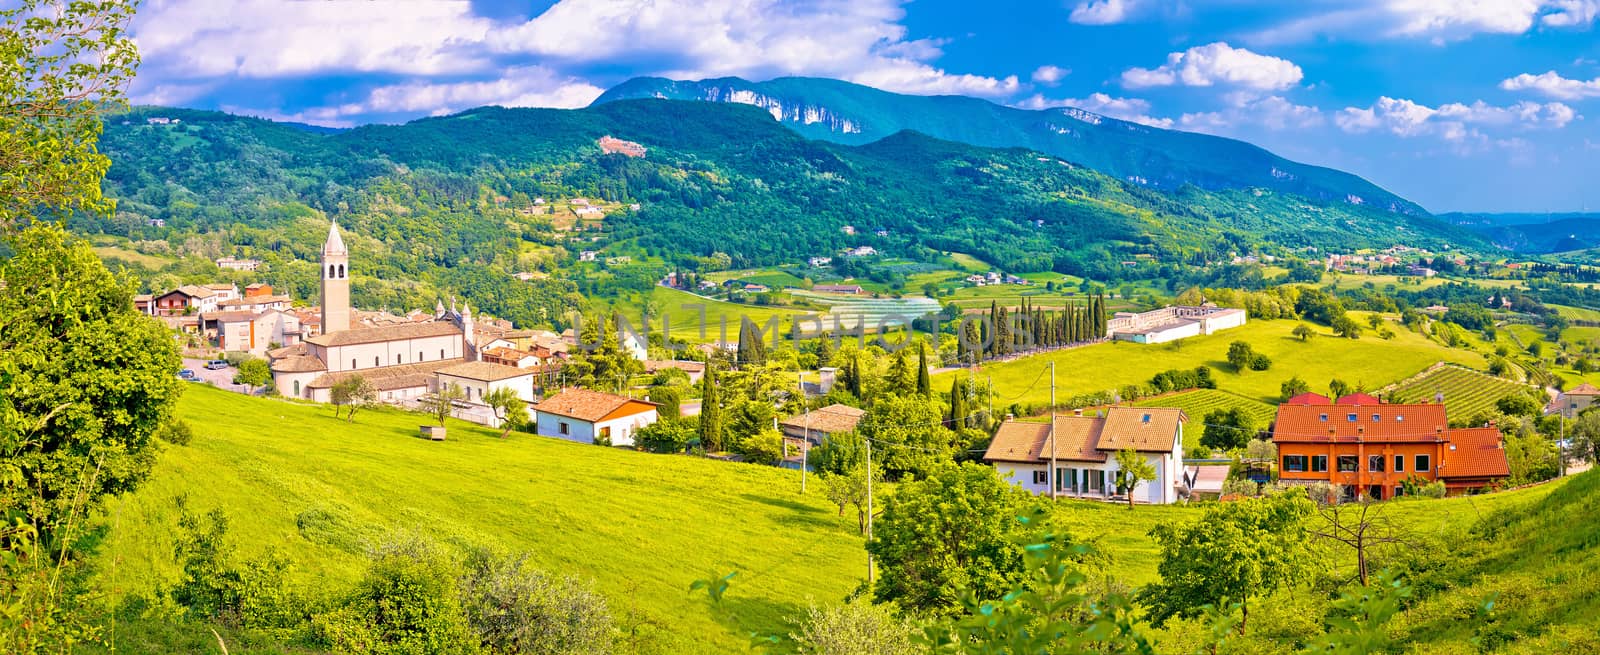 Picturesque village of Pazzon panoramic view by xbrchx